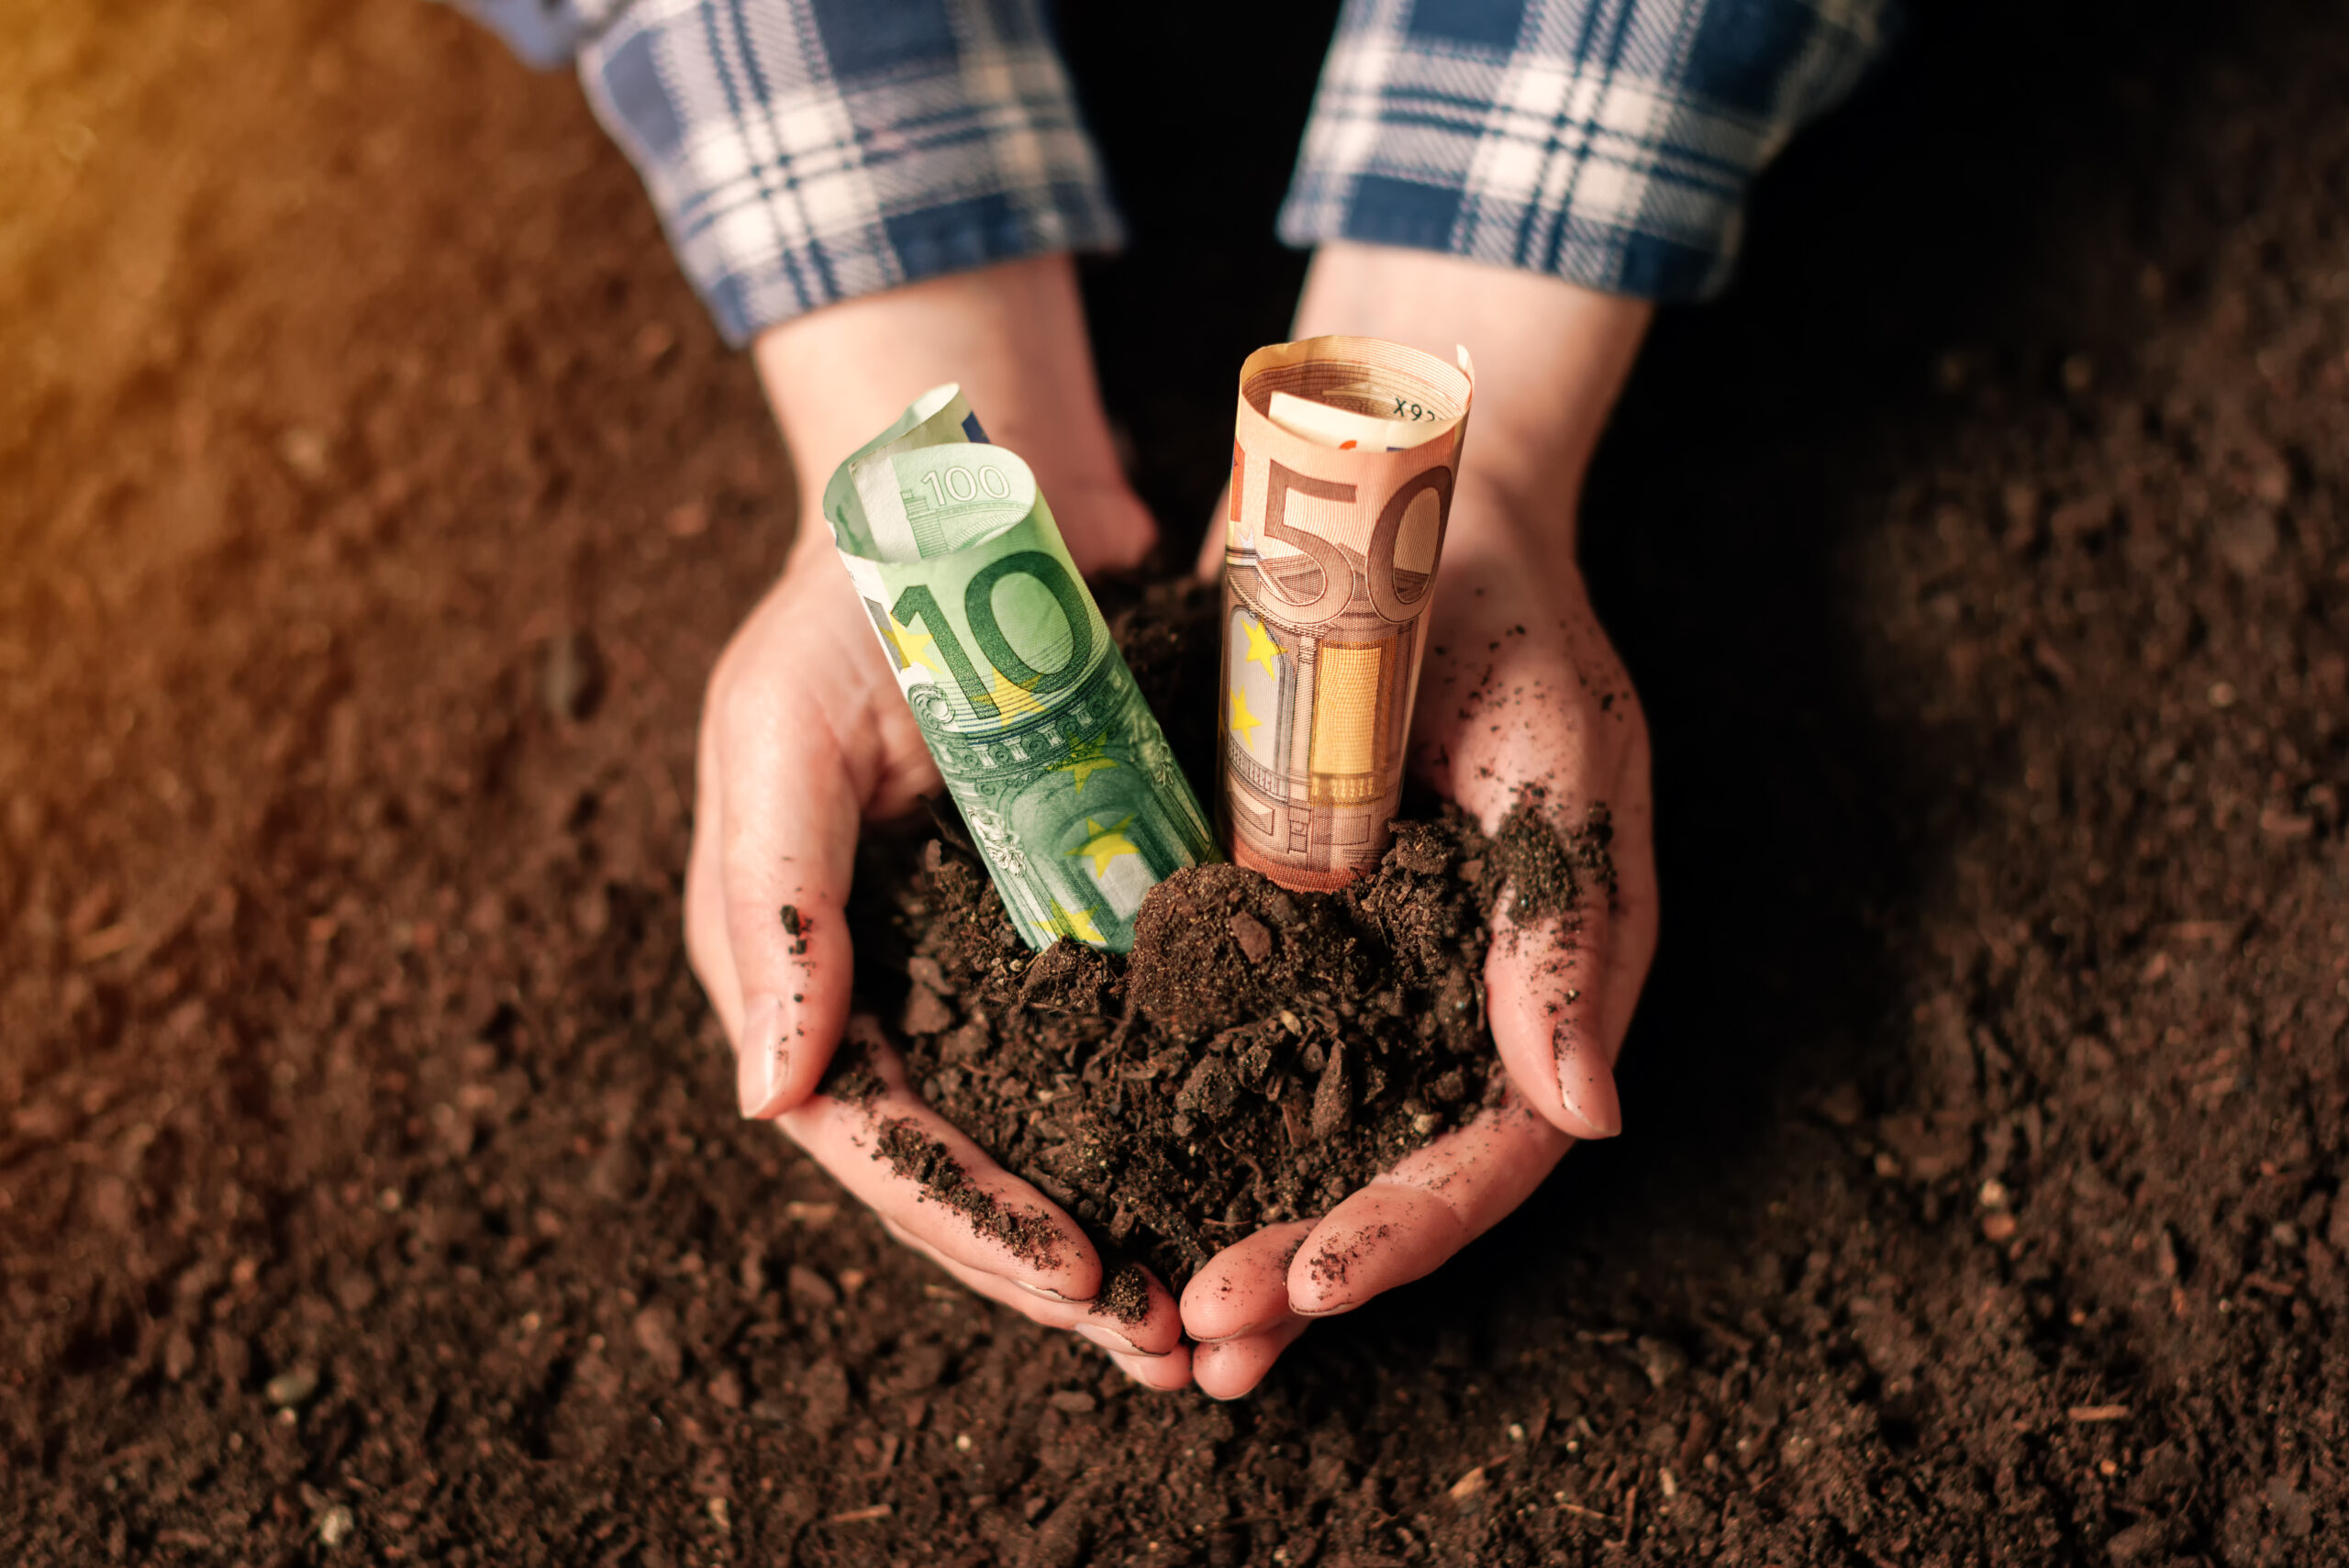 Hands with fertile soil and euro money banknotes, female farmer handful of cultivated land that makes profit and steady income from sustainable agricultural activity like organic growth of crops